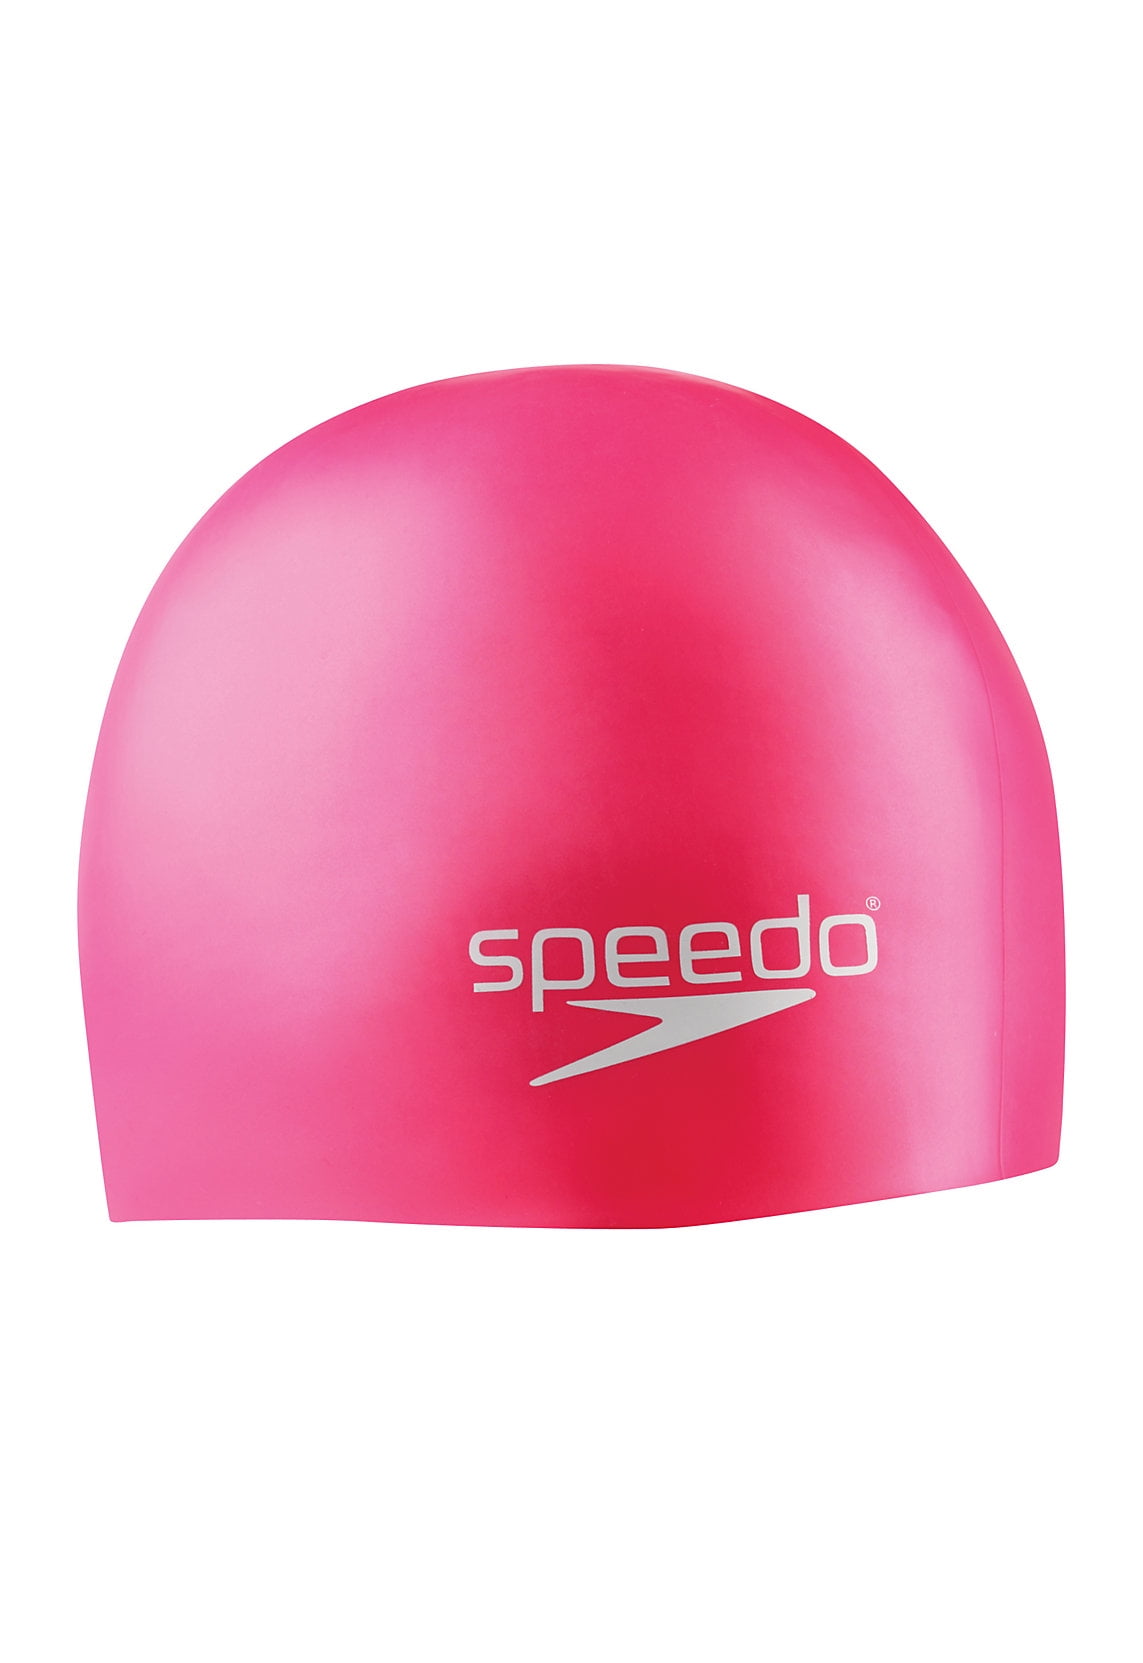 Hf6 Speedo Silicone Solid Swim Cap Pink One Size for sale online 